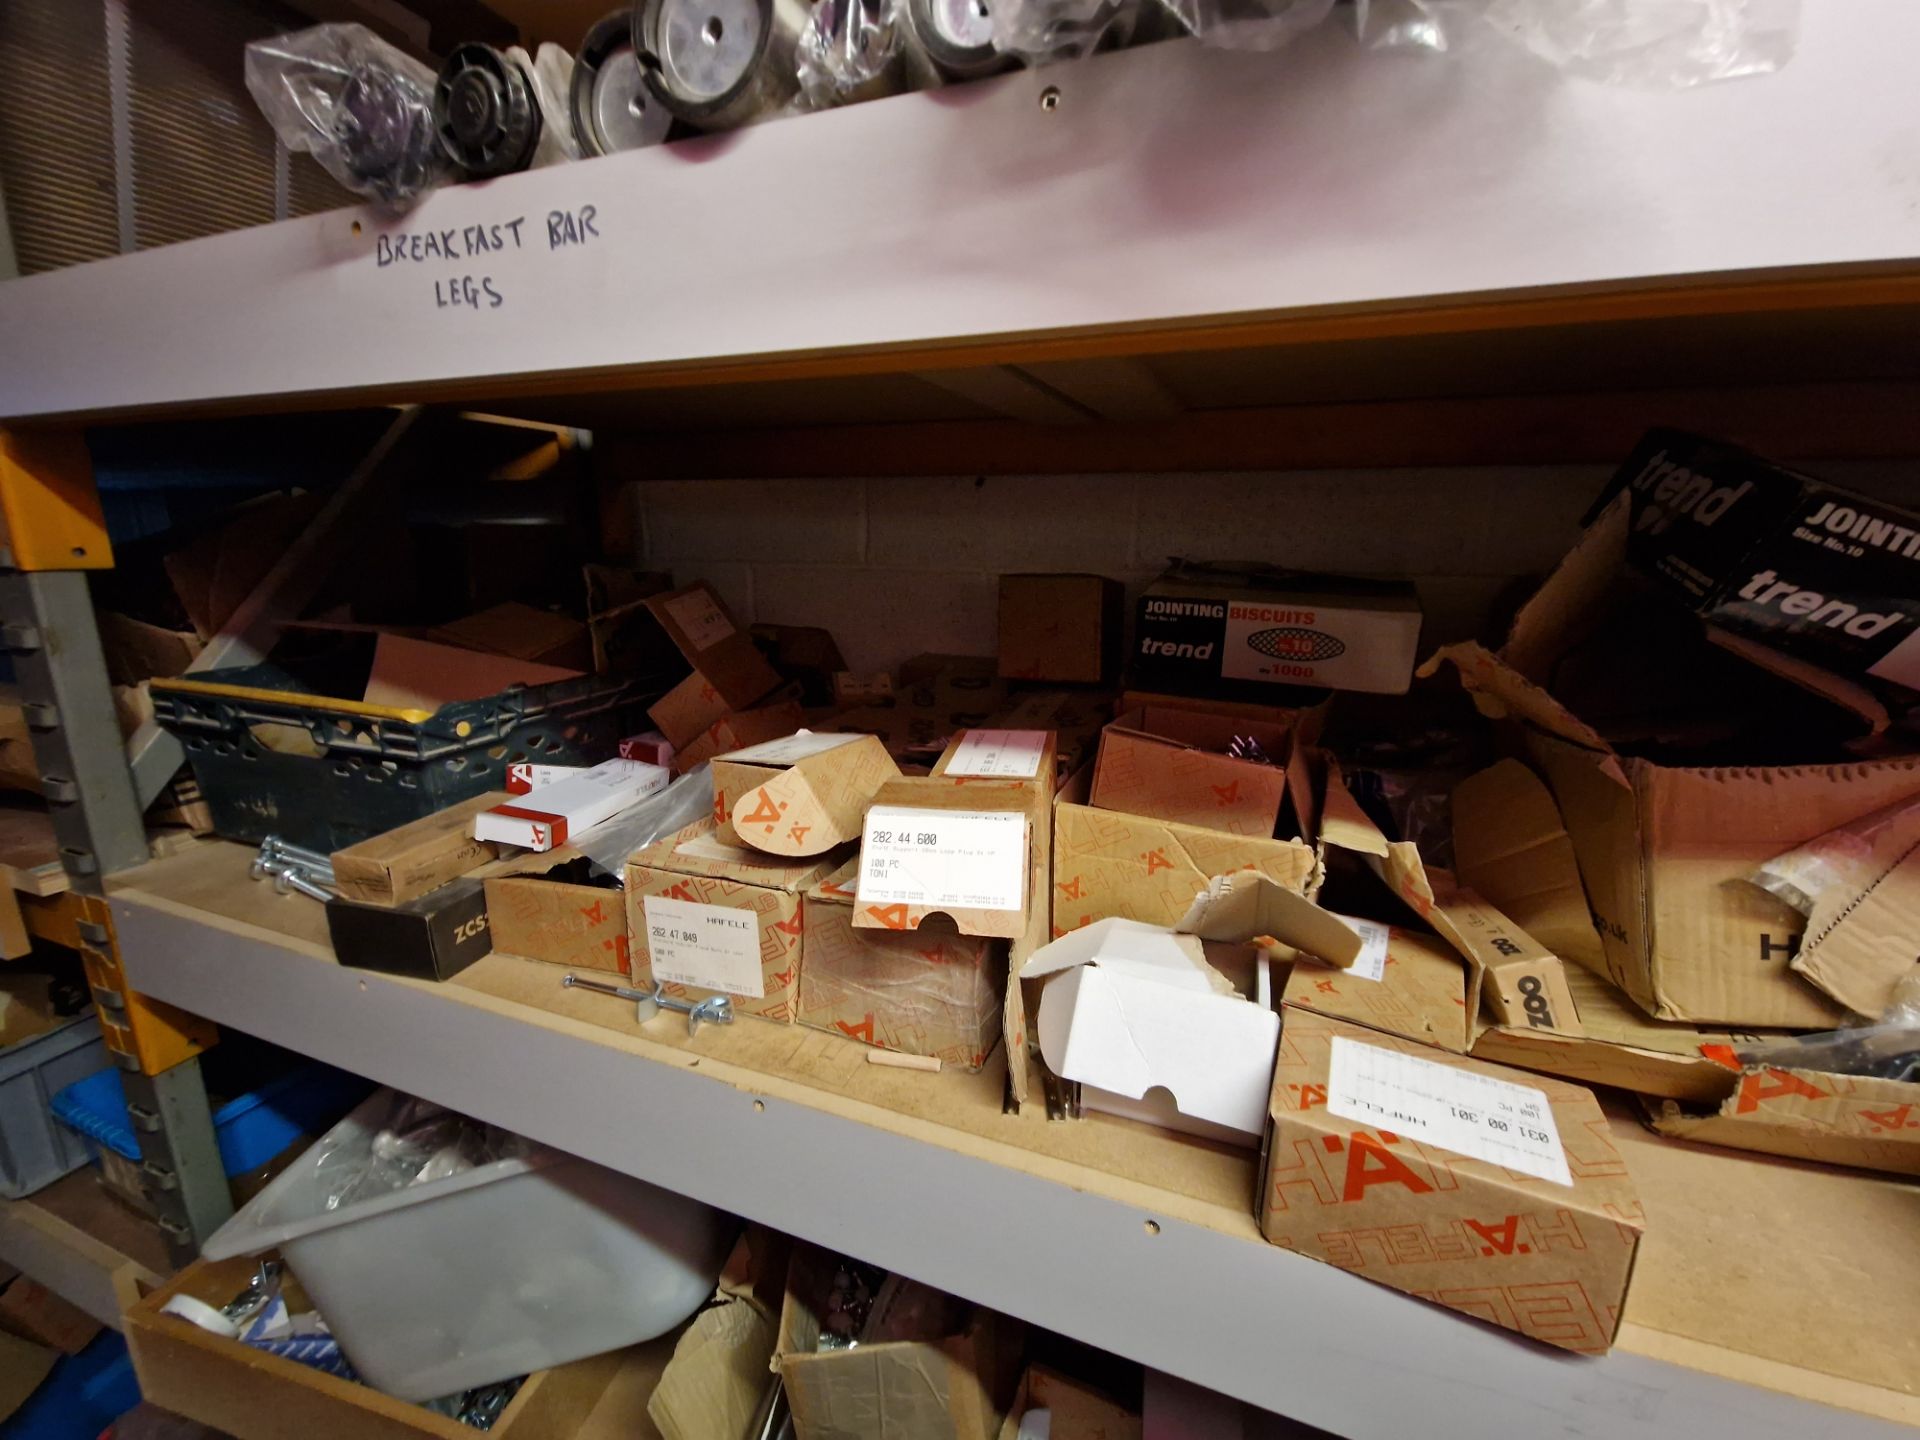 Contents to One Bay of Racking, including Fixtures, Fittings, Bolts, Drawer Runners, Bar Legs, - Image 19 of 32